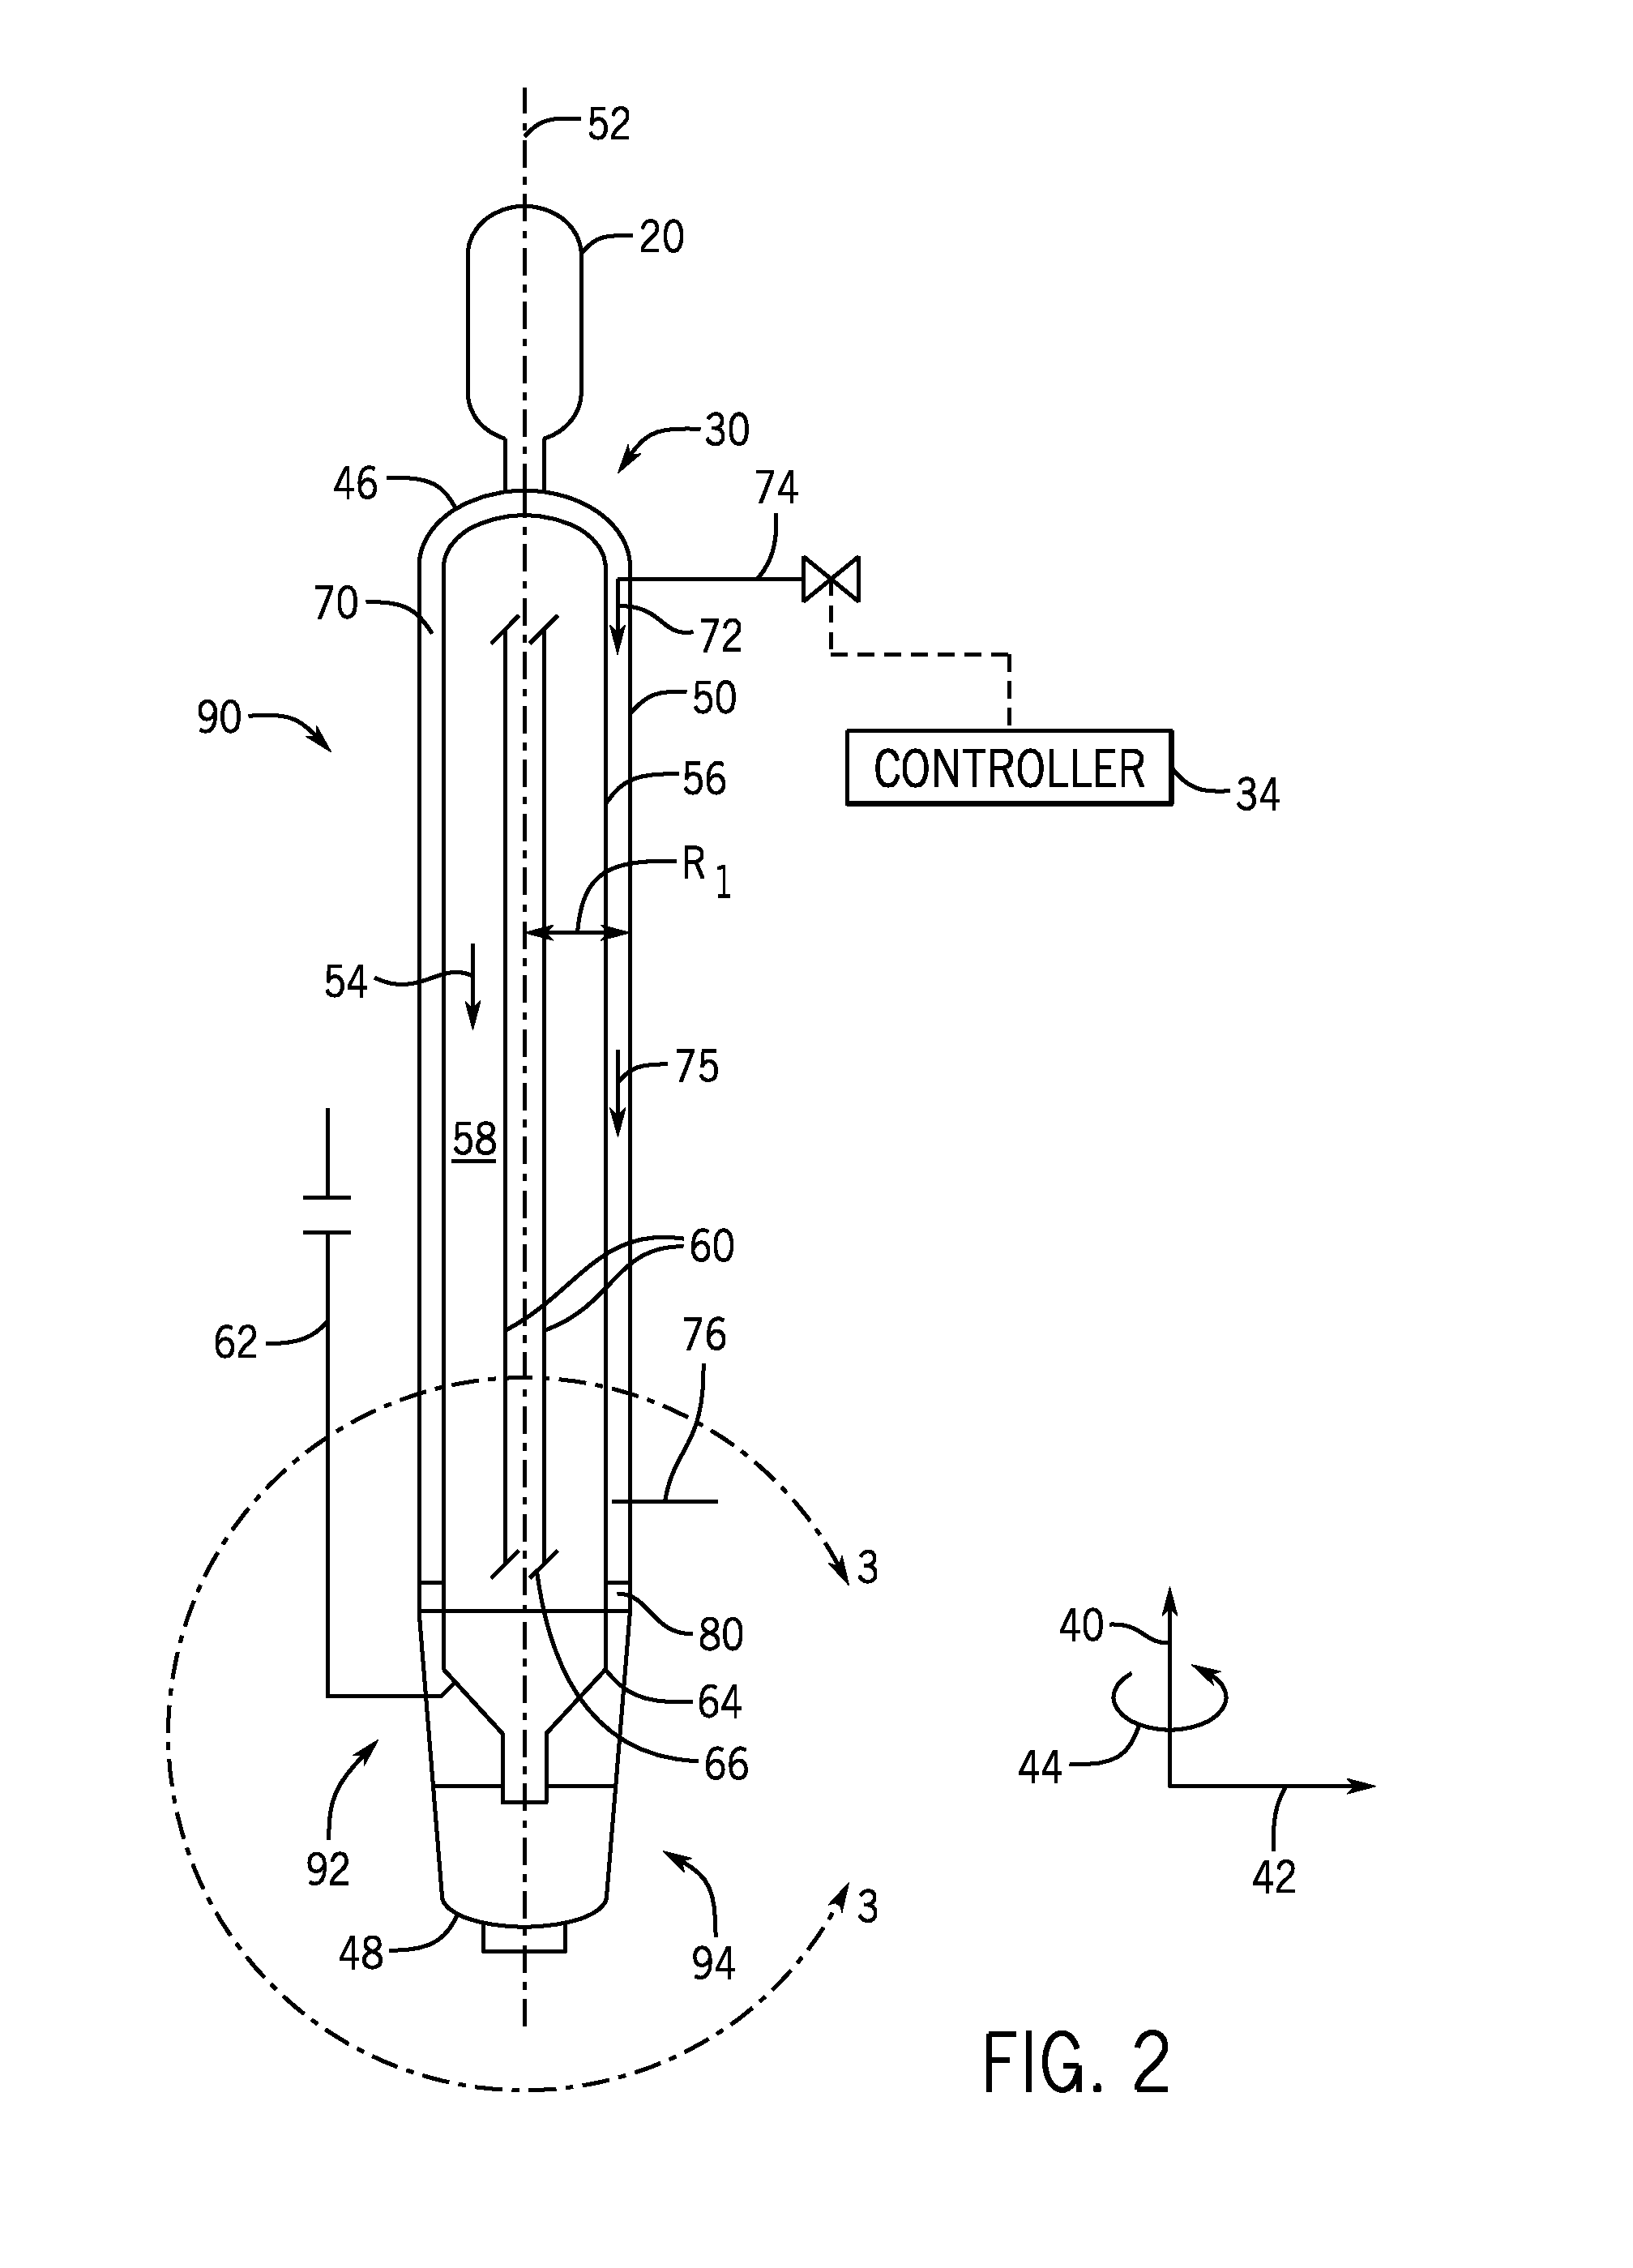 System and method for cooling syngas within a gasifier system